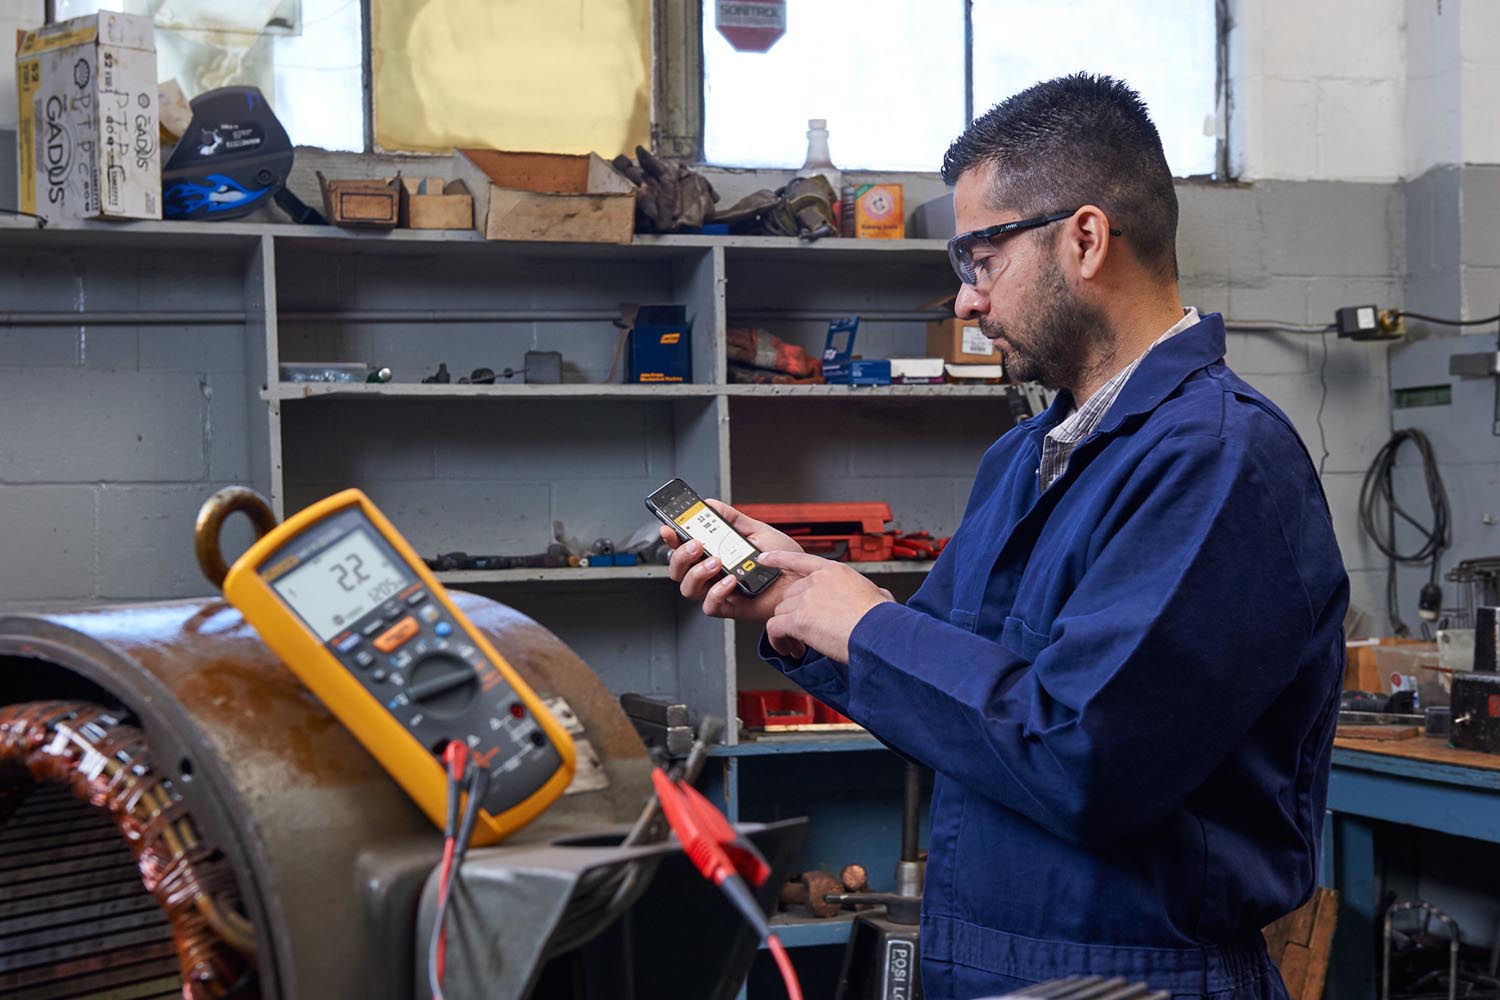 A technician in a shop makes measurements on an industrial motor and views results on his smartphone